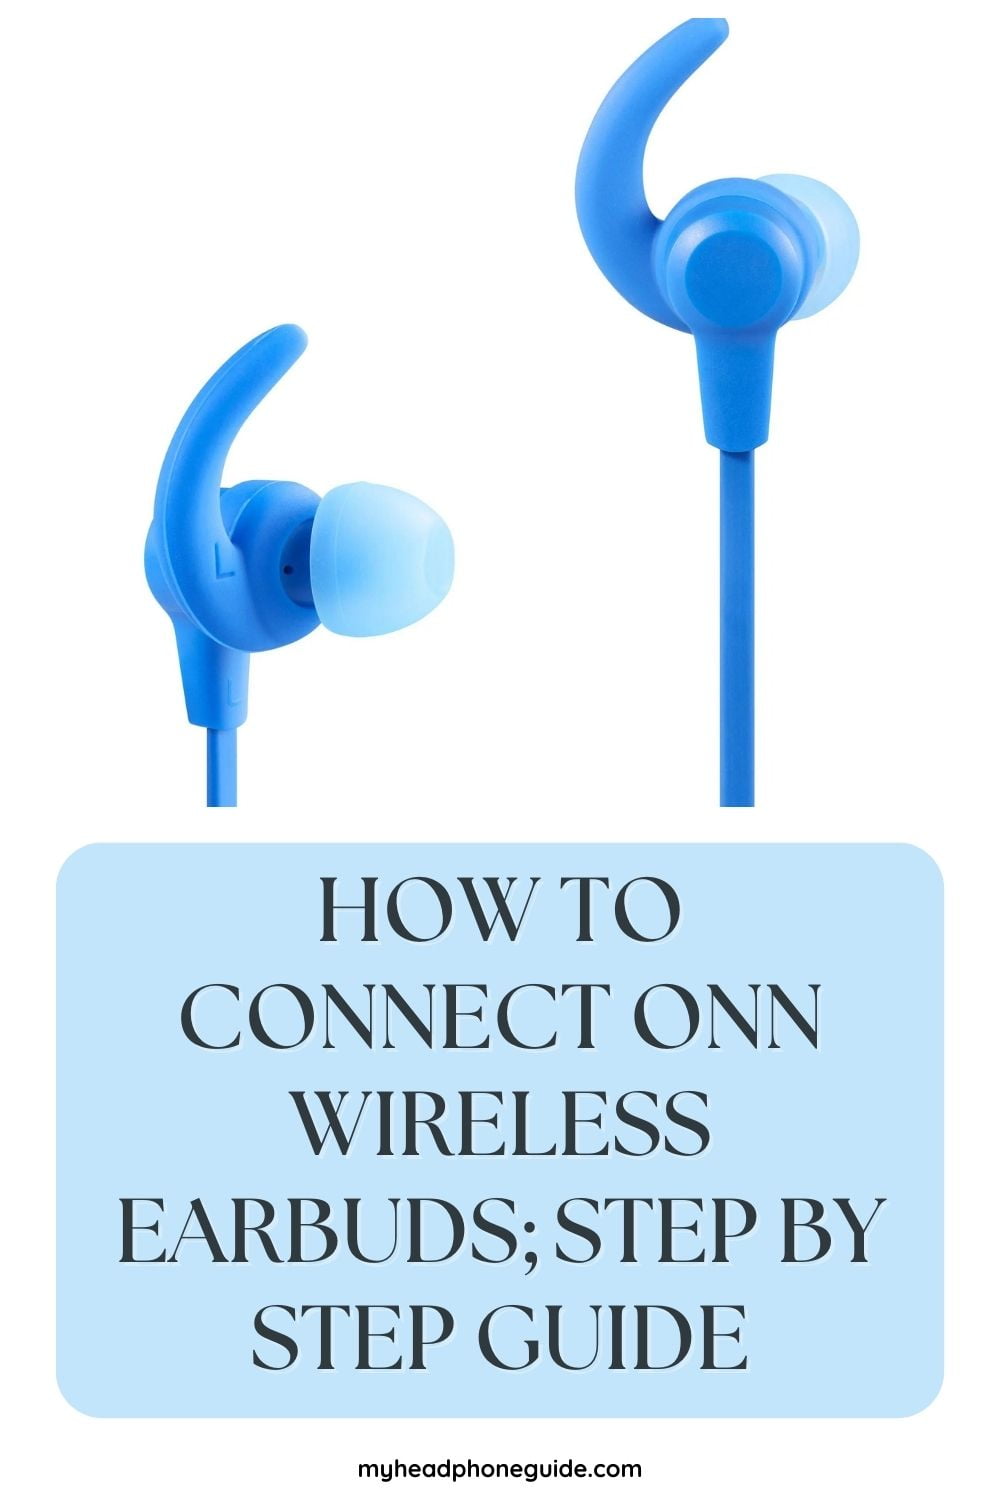 How To Connect Onn Wireless Earbuds; Step By Step Guide